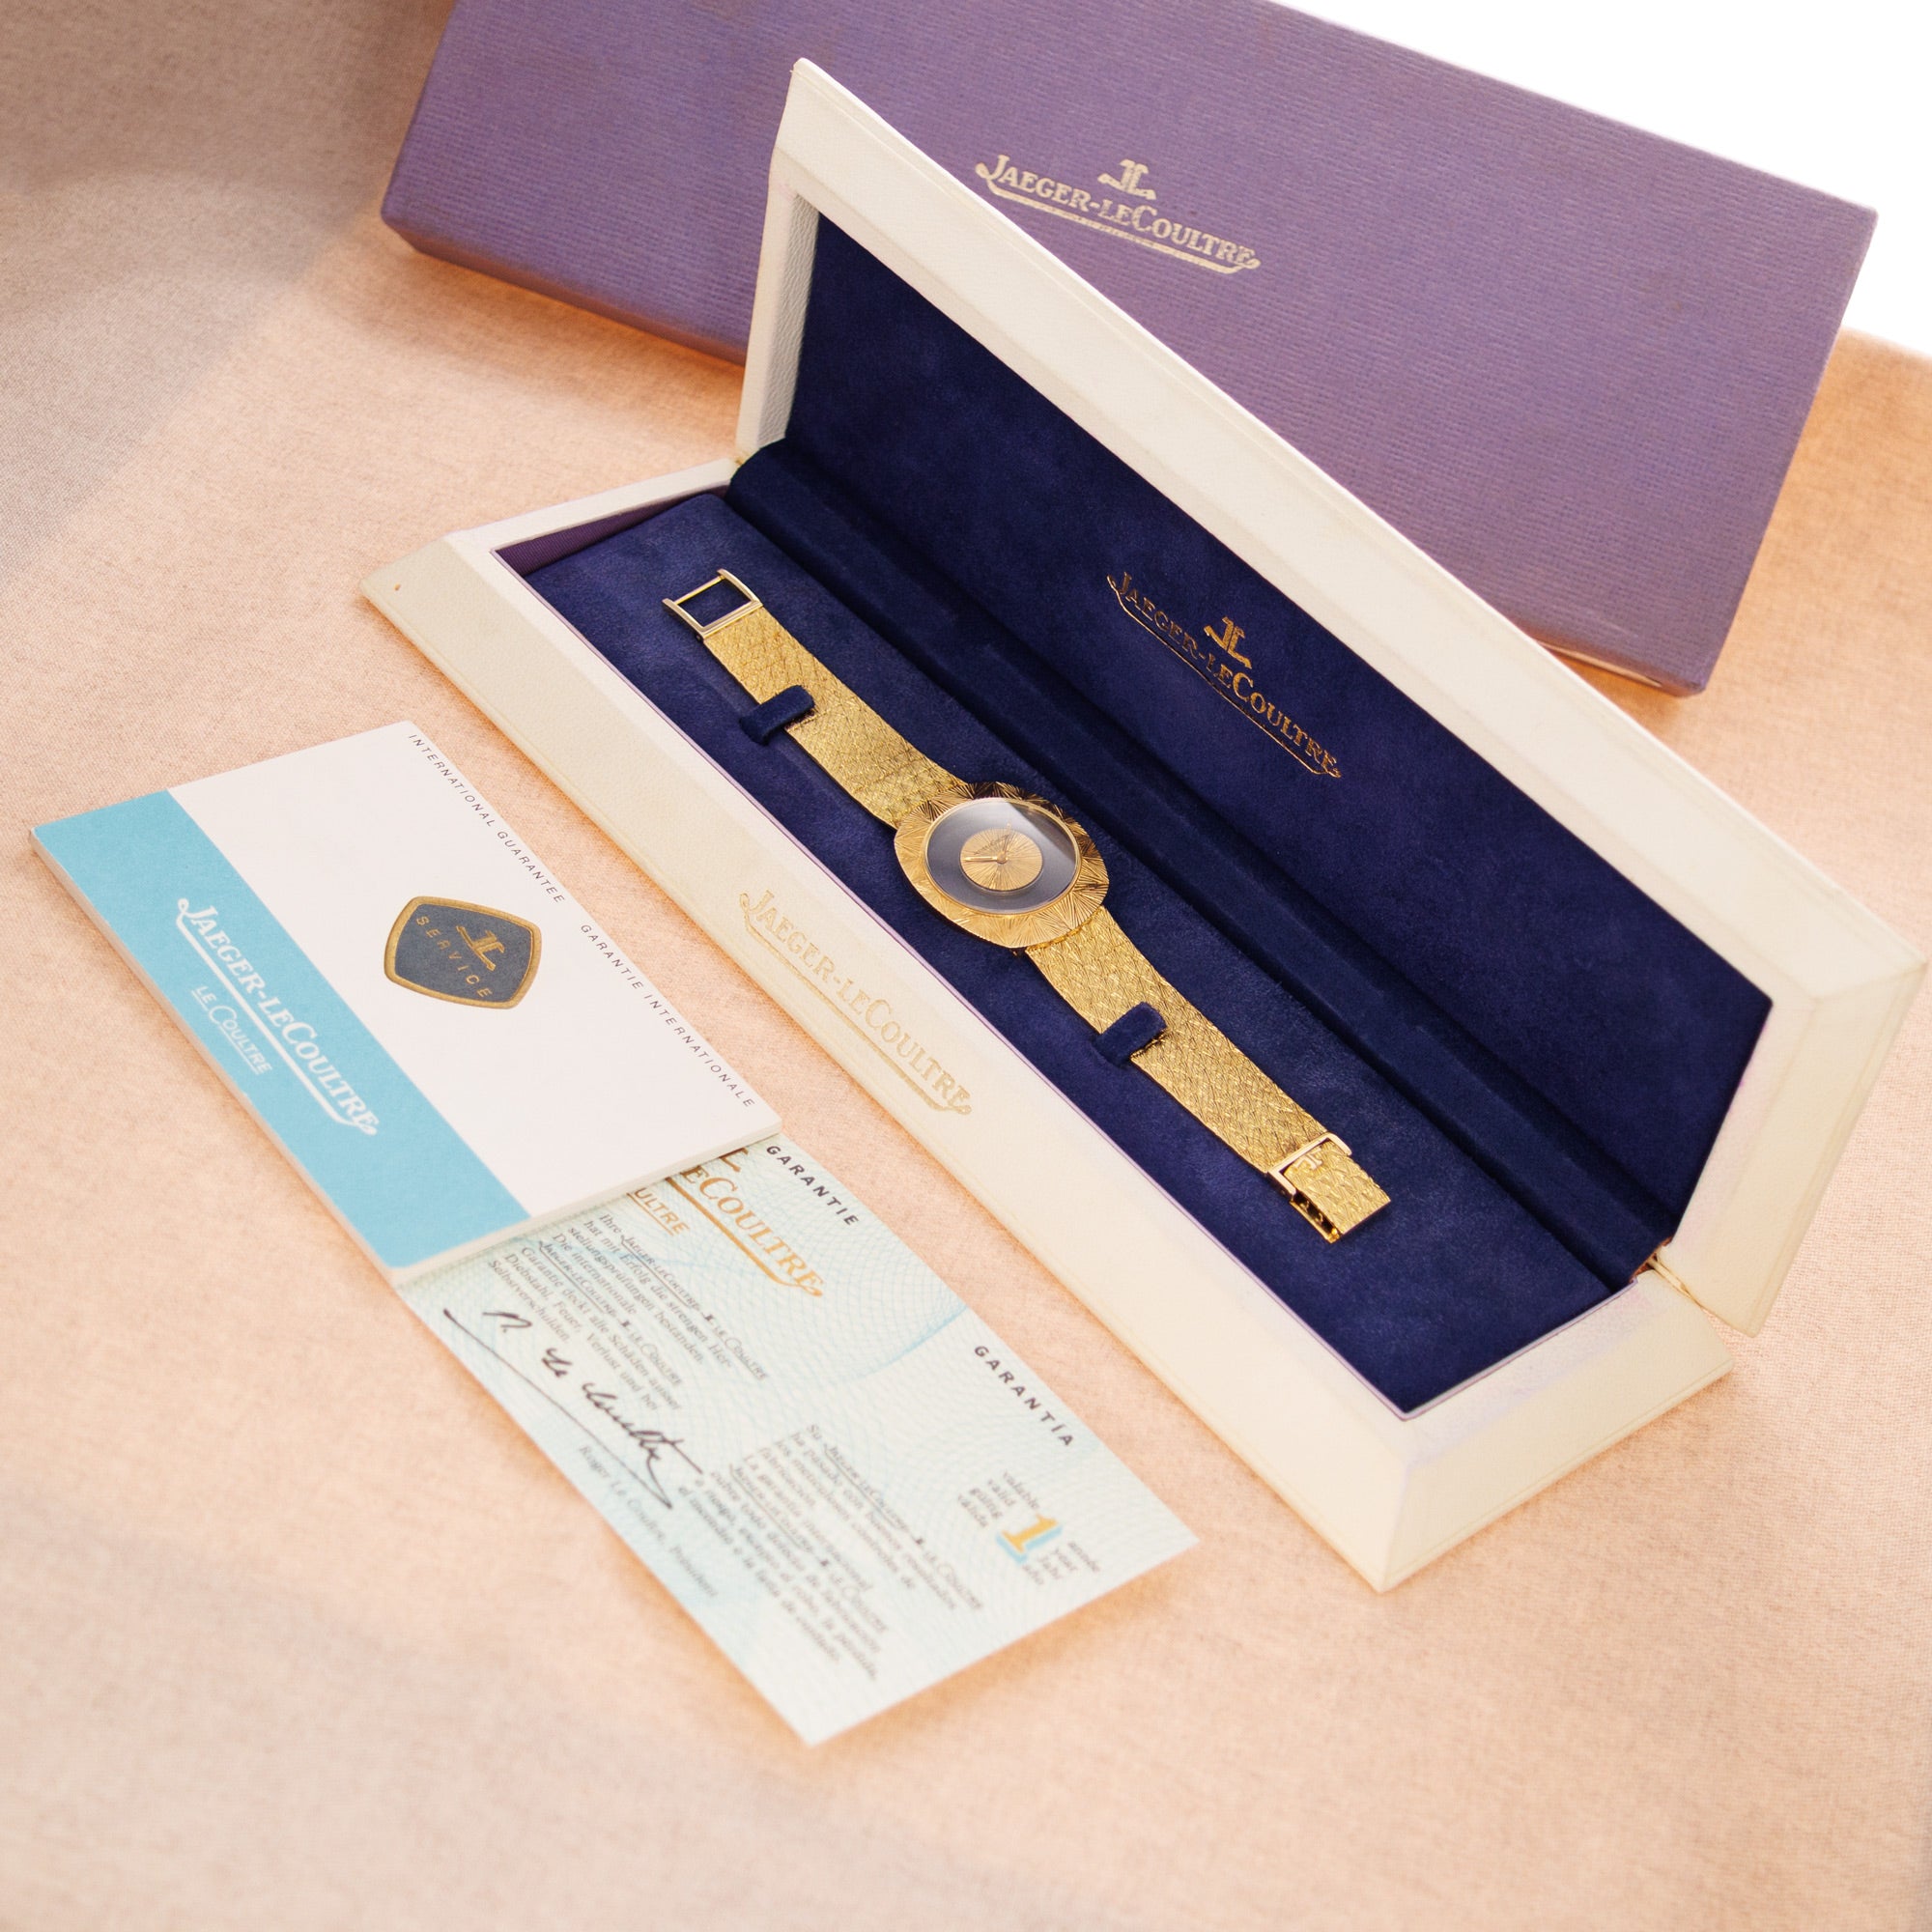 Jaeger Lecoultre Yellow Gold Mystery Watch Ref. 17006